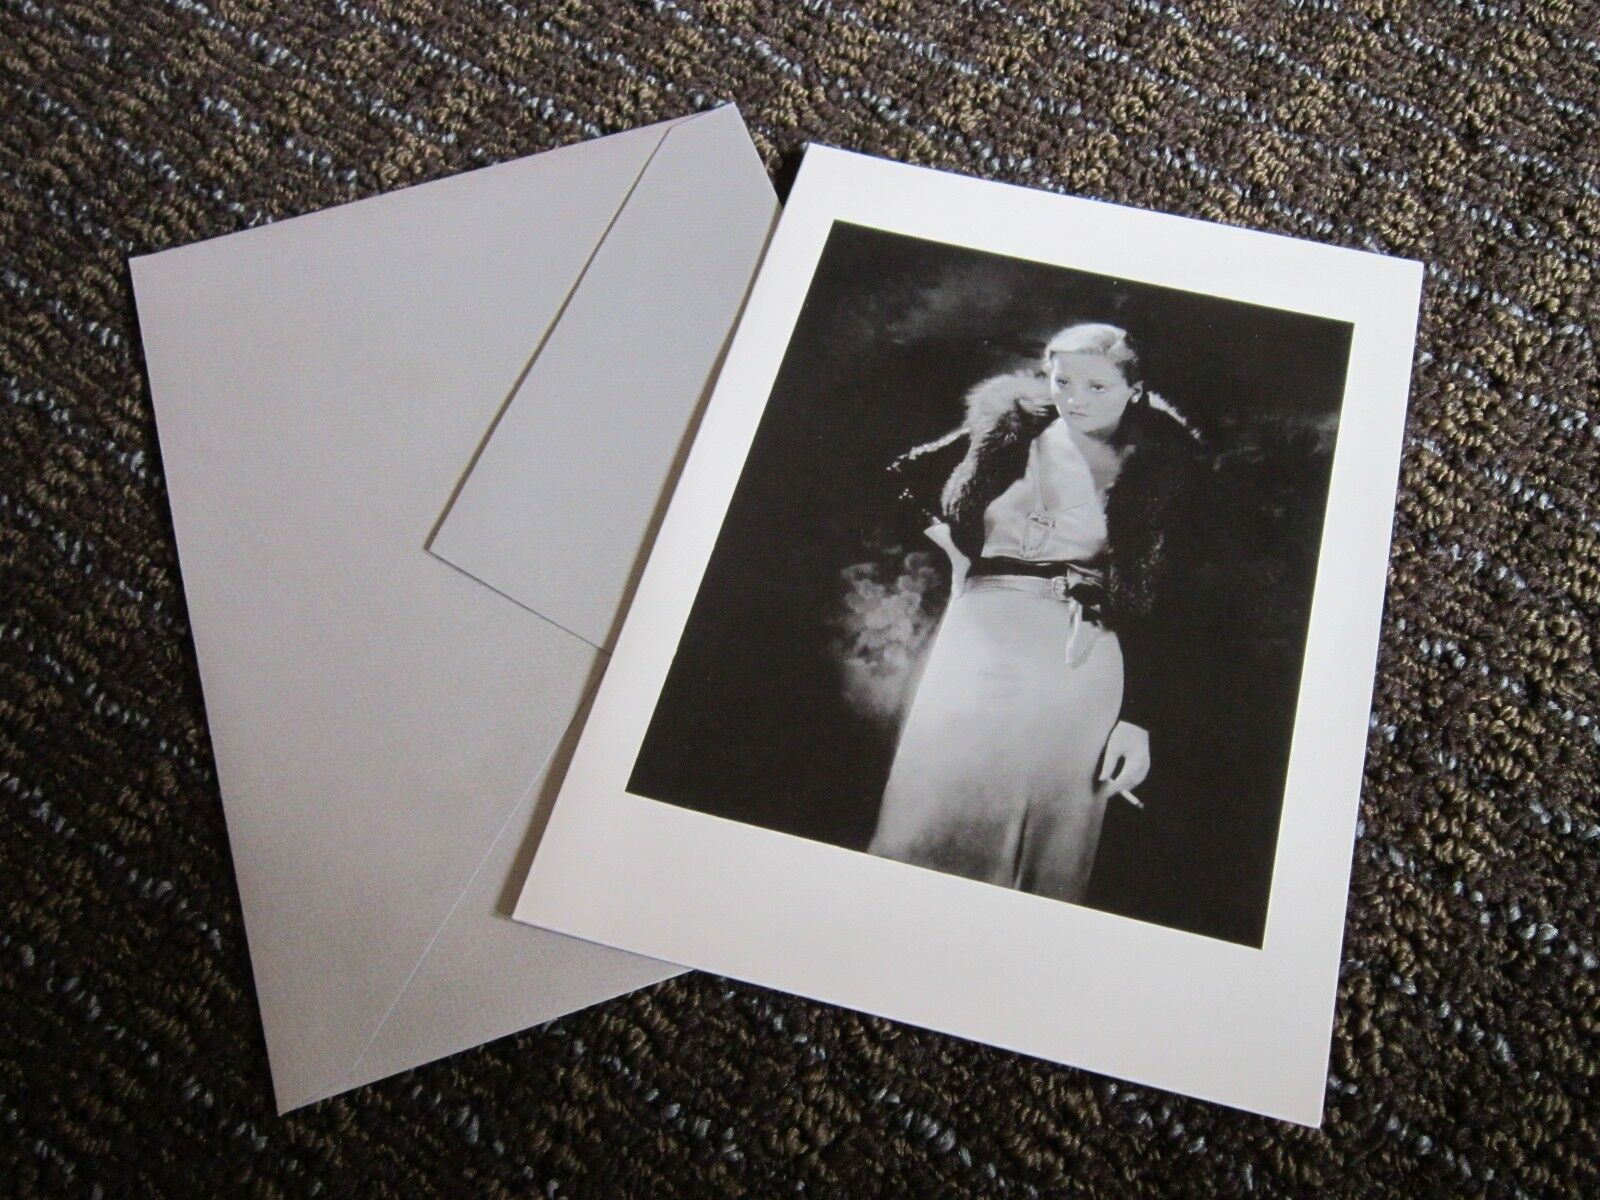 Tallulah Bankhead Shallit Notecard Suitable for Framing 1931 image Old Hollywood